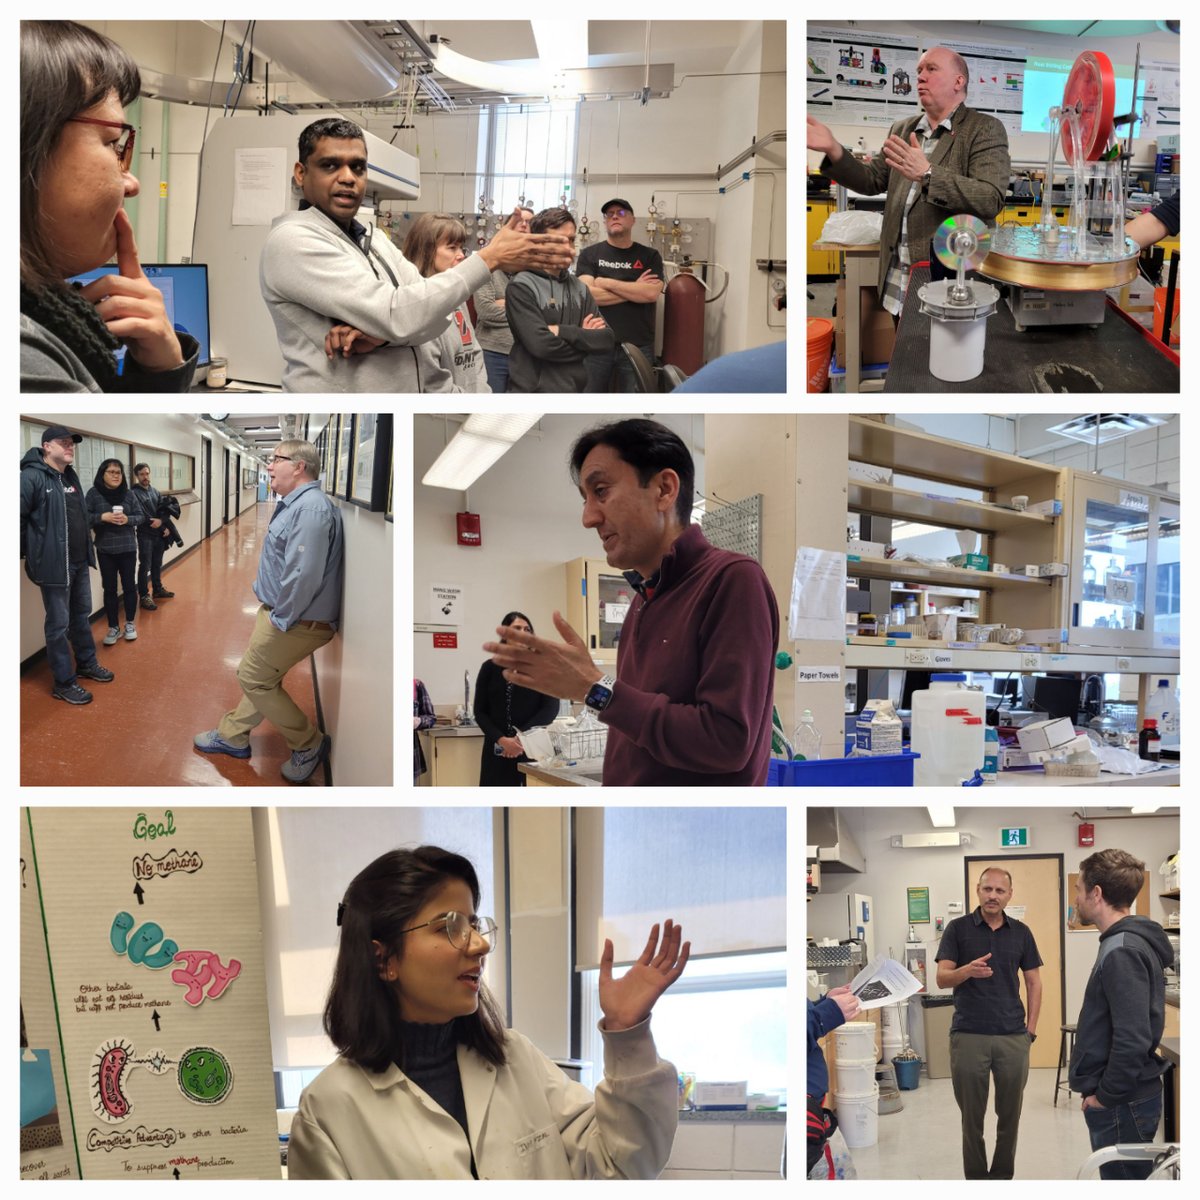 Explore a little deeper into each of our labs from the recent tours with junior high and high school teachers @UofAALES @UAlberta_Eng @ualbertaScience #labtour #education #energy @SteveBergens @RajendranArvind @ua_futureenergy @ATASciCouncil